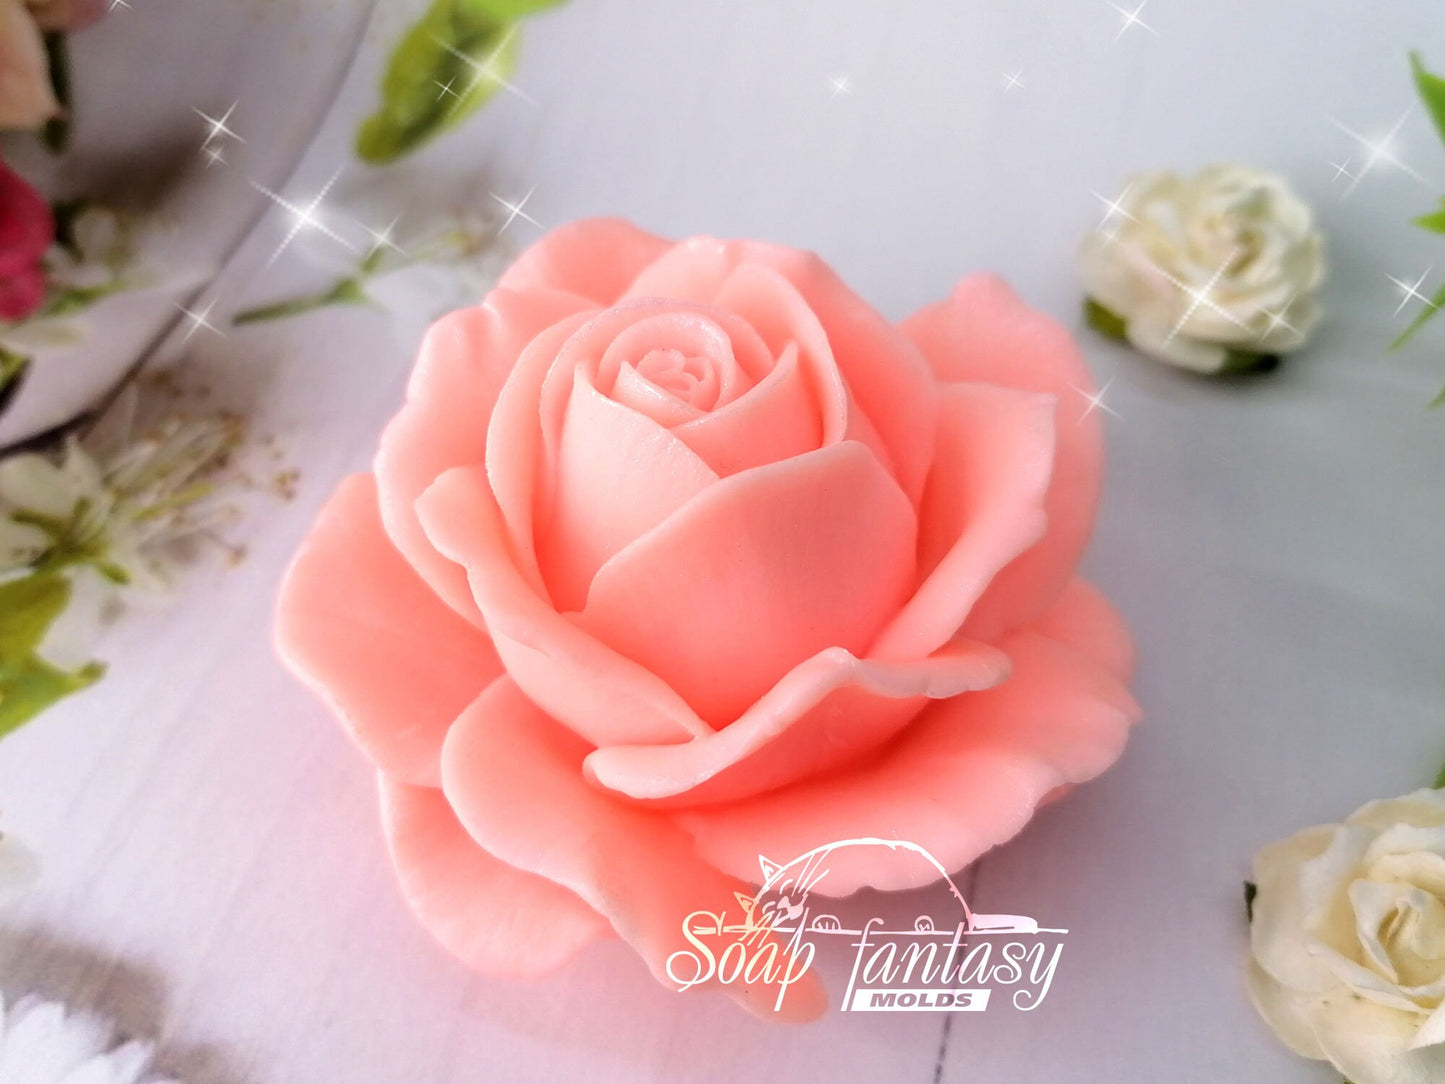 Big rose "Aurora" silicone mold for soap making